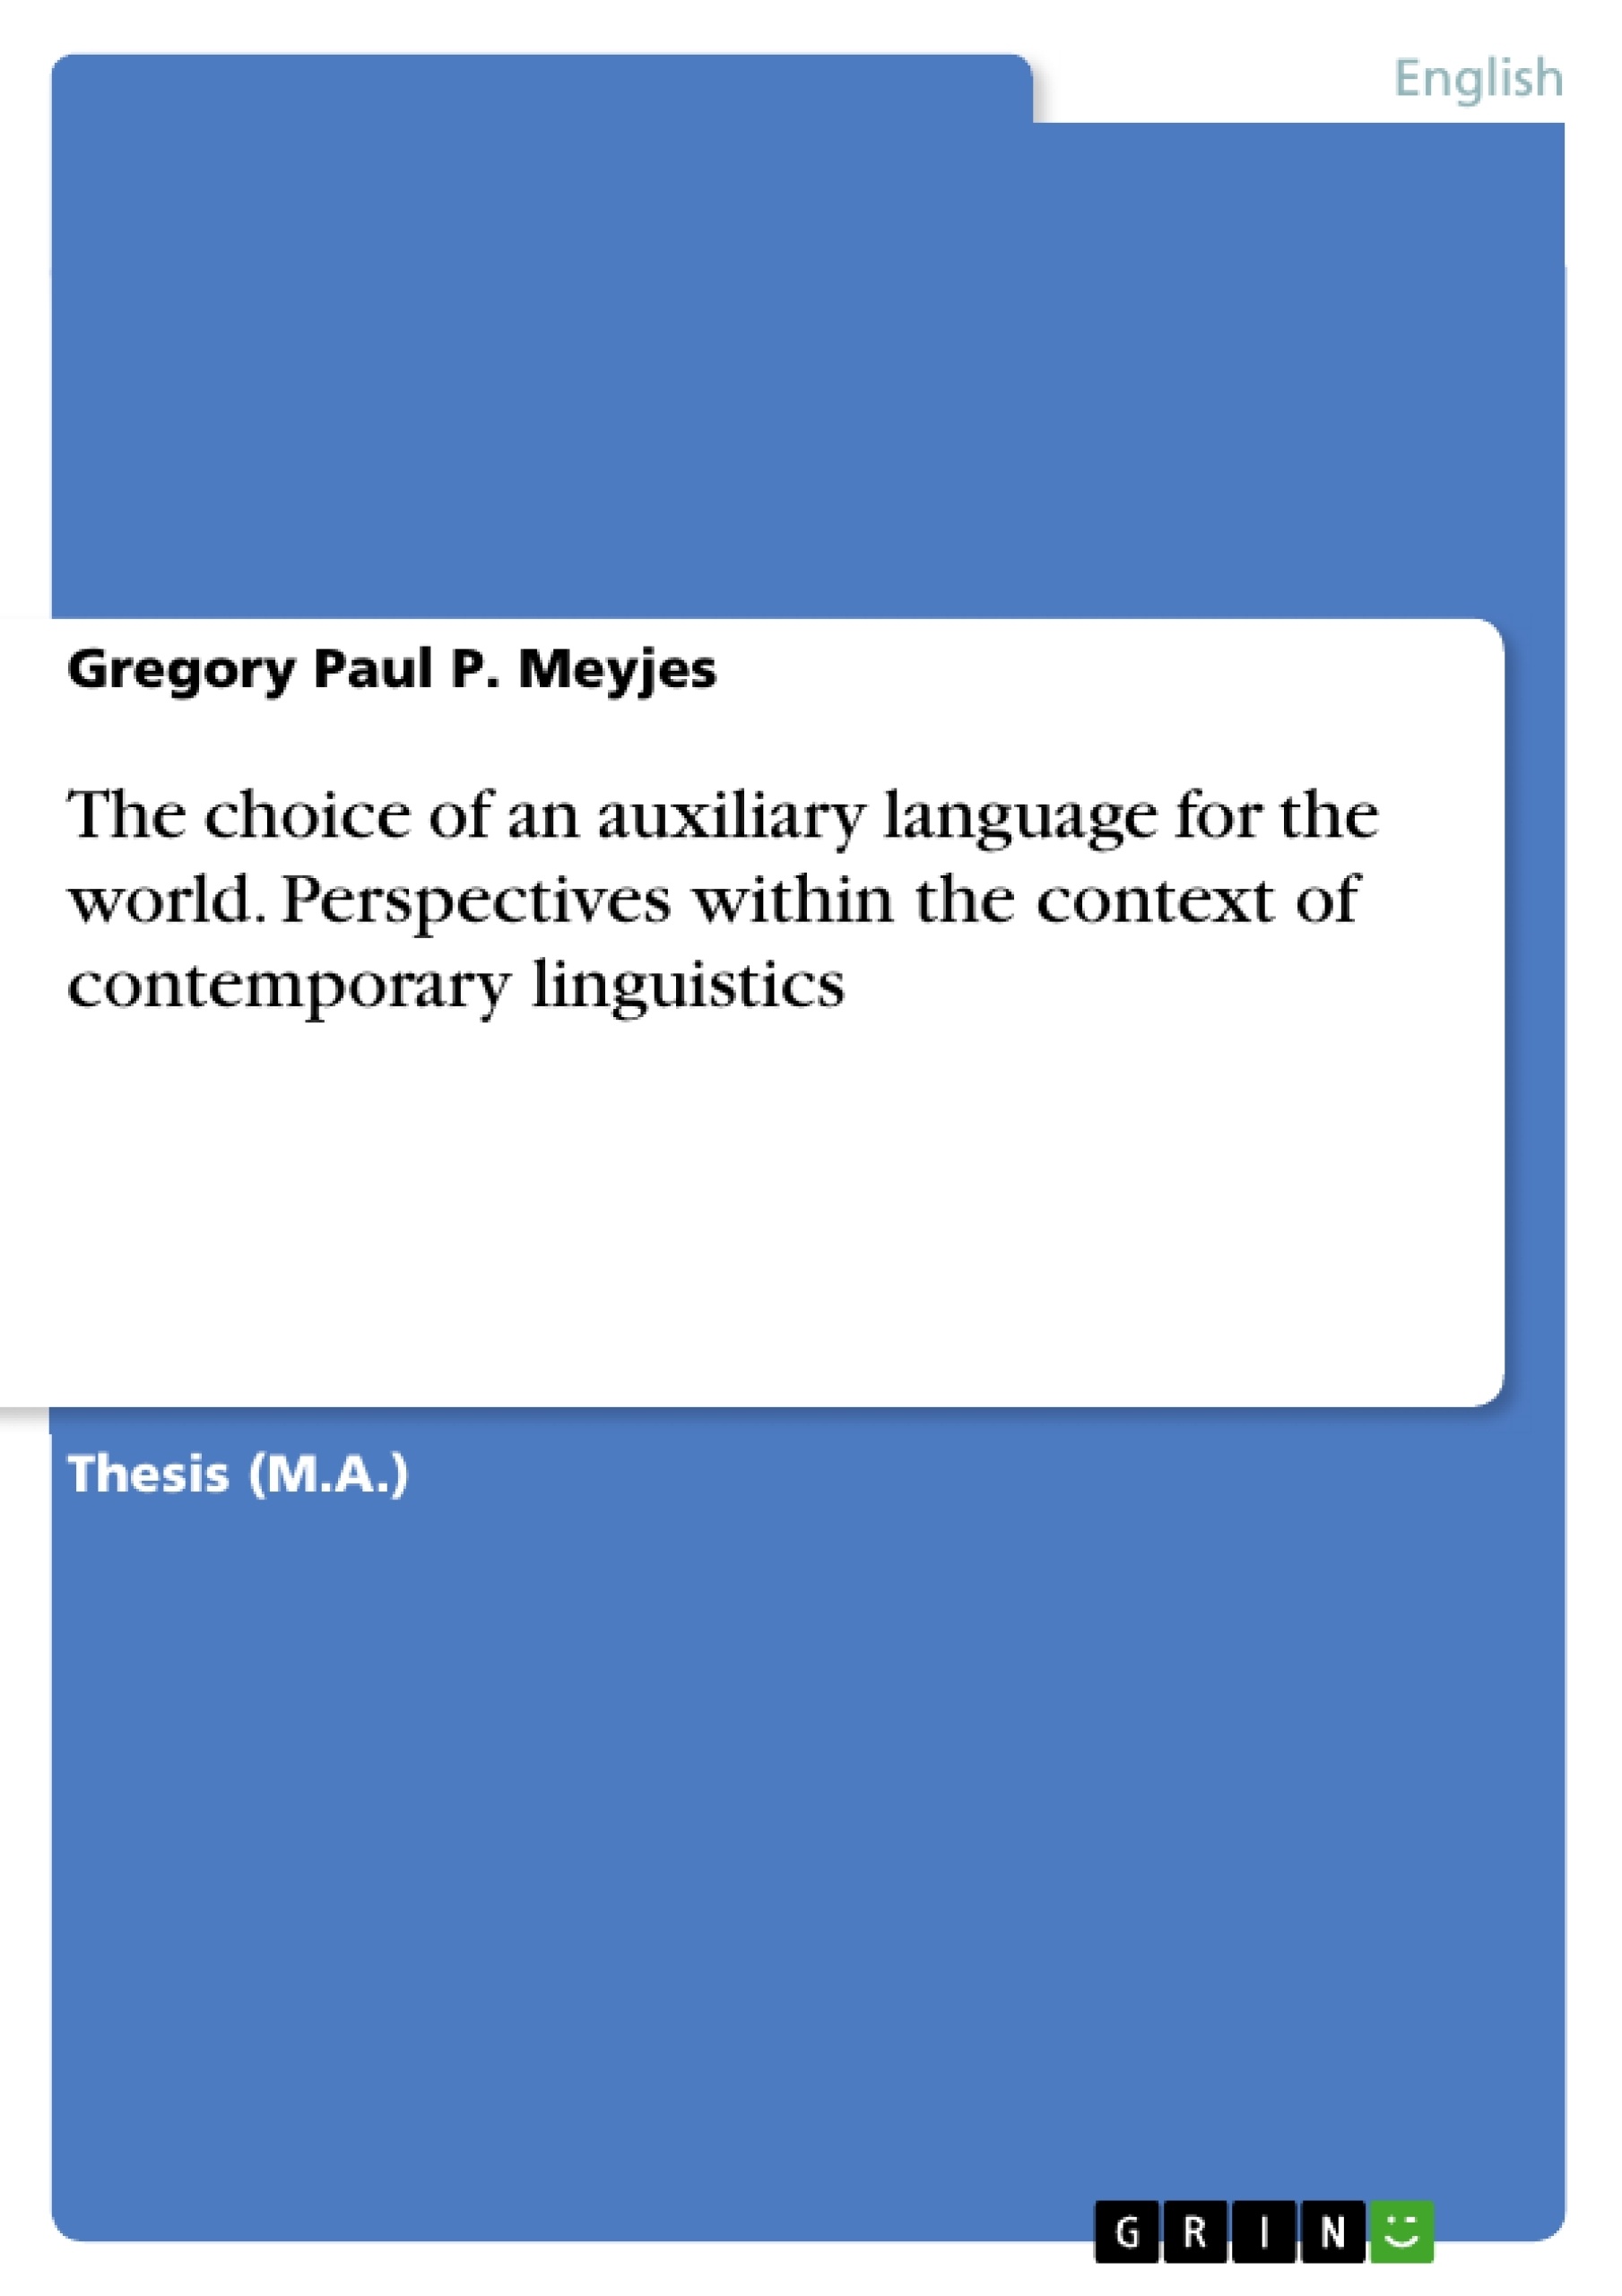 Title: The choice of an auxiliary language for the world. Perspectives within the context of contemporary linguistics